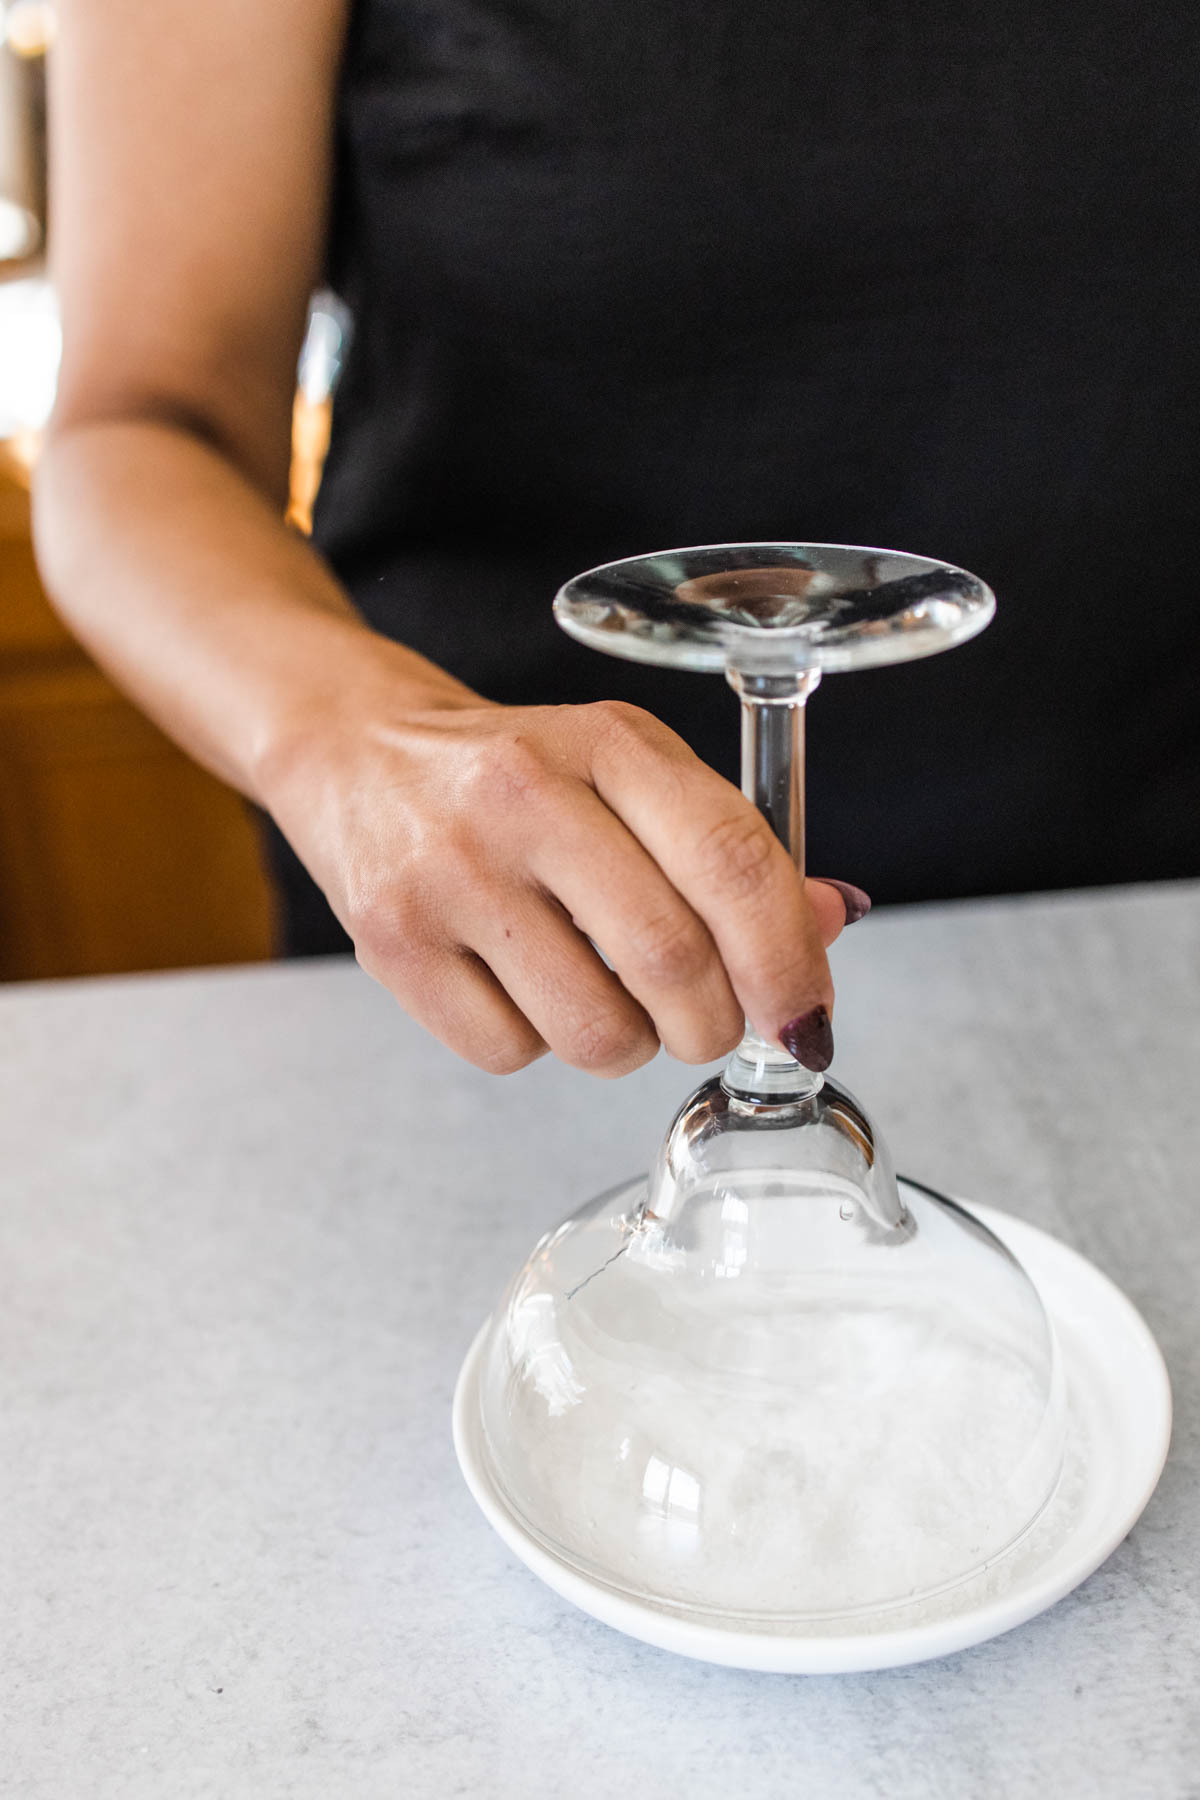 Dipping a margarita glass into a shallow plate of salt.